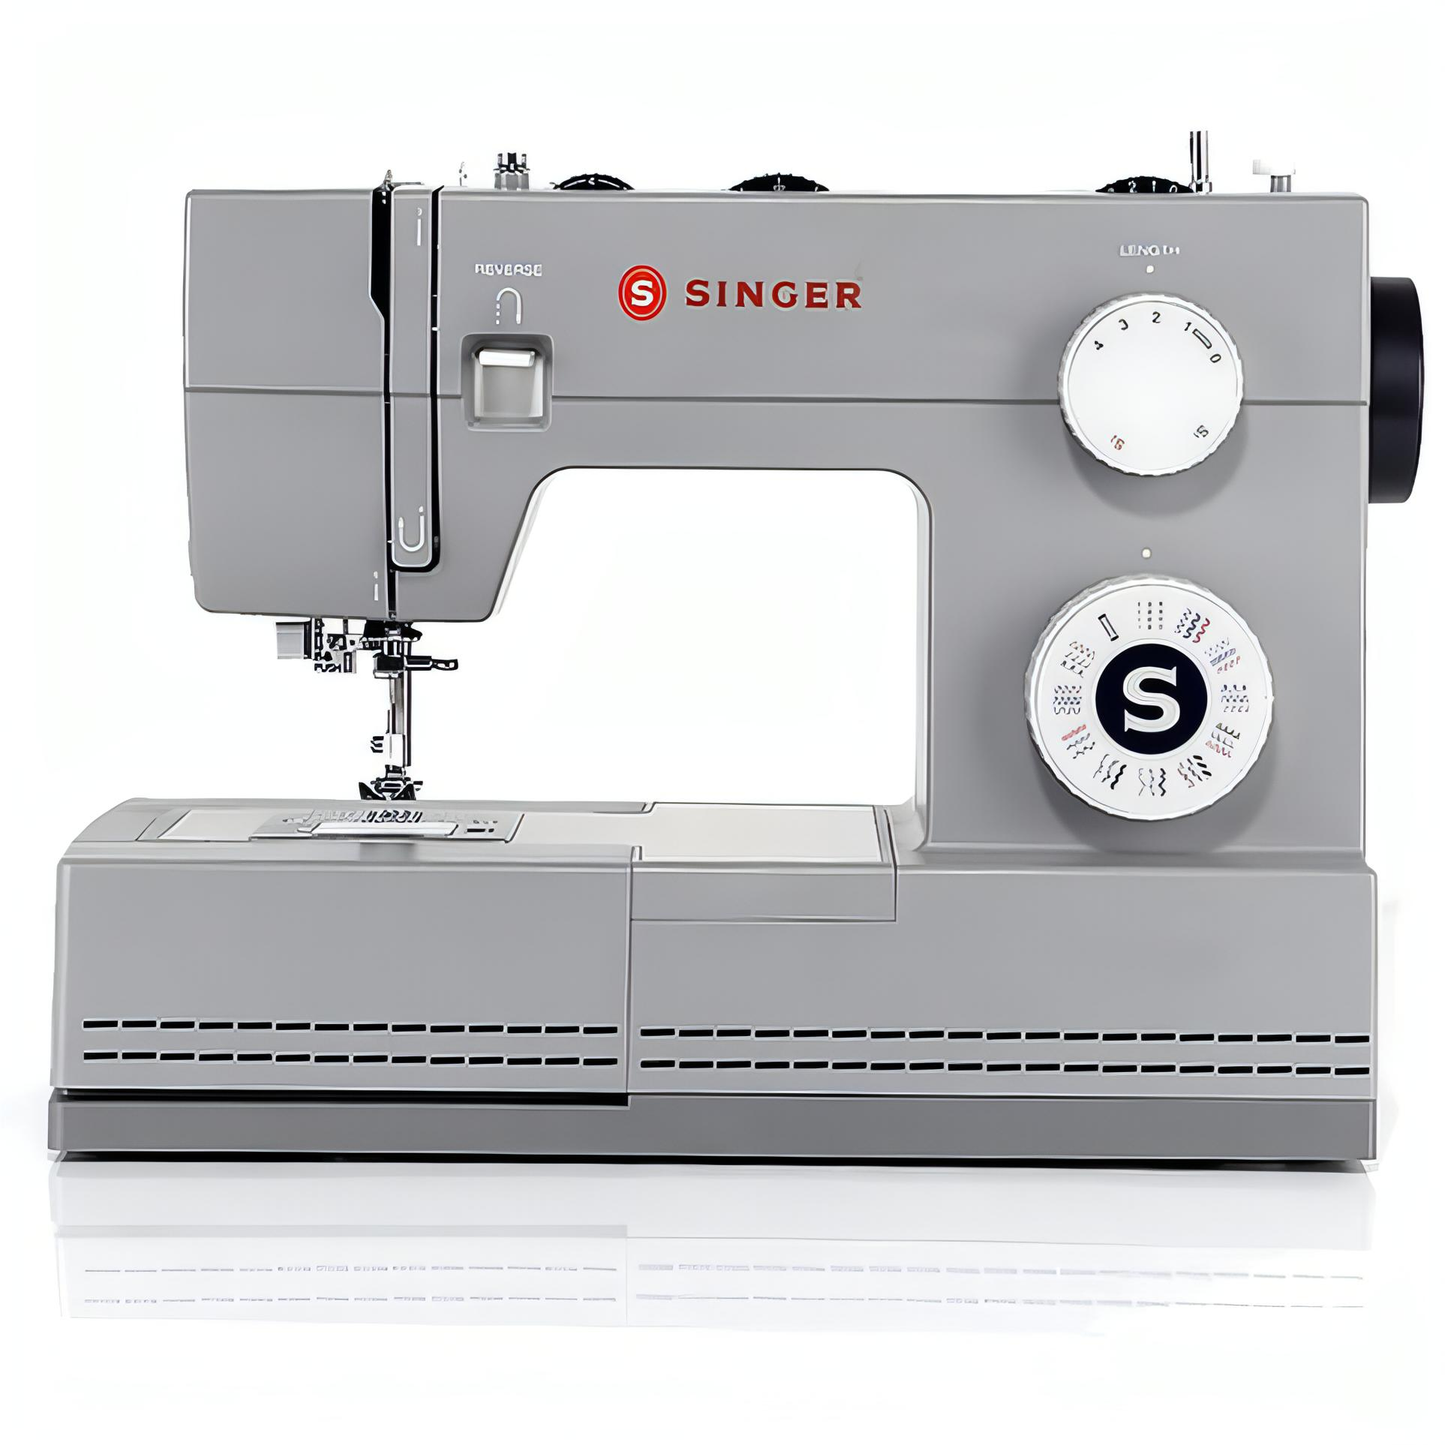 Singer Heavy Duty 4423 Sewing Machine * FREE Upgrade to new 4432 edition at no extra cost * Latest 2024 model with dual pulley system for maximum penetration power